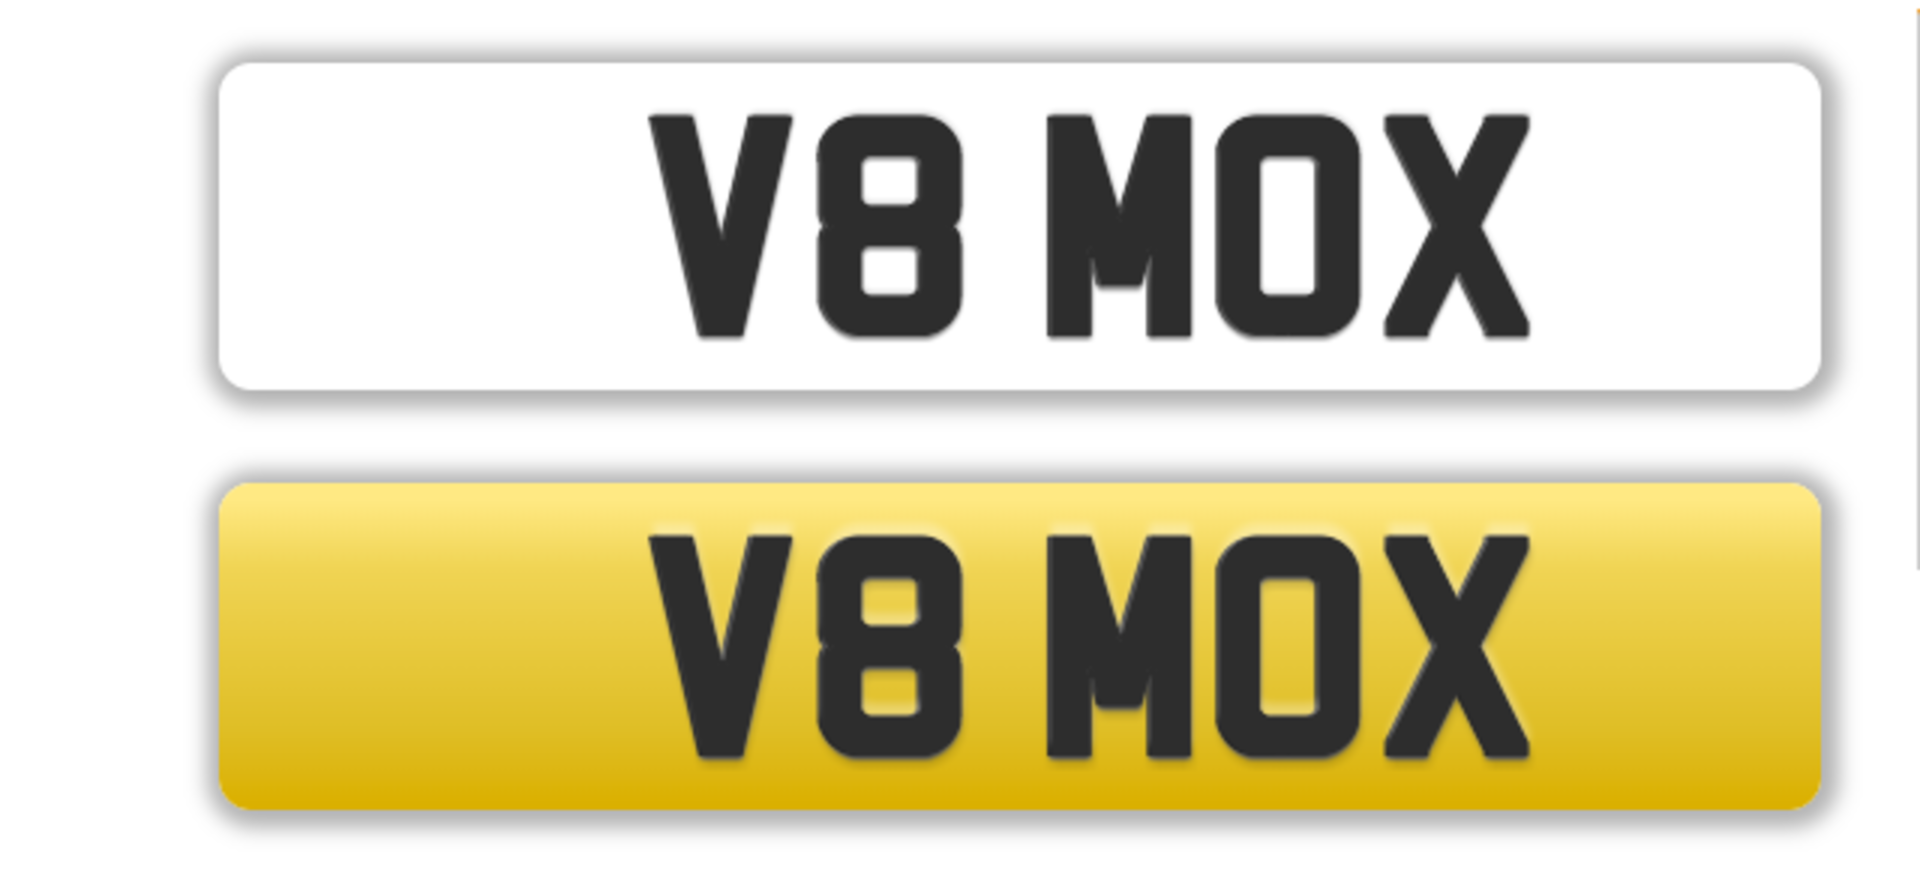 V8 MOX - on DVLA retention ready to transfer to the winning bidder with no transfer fees.